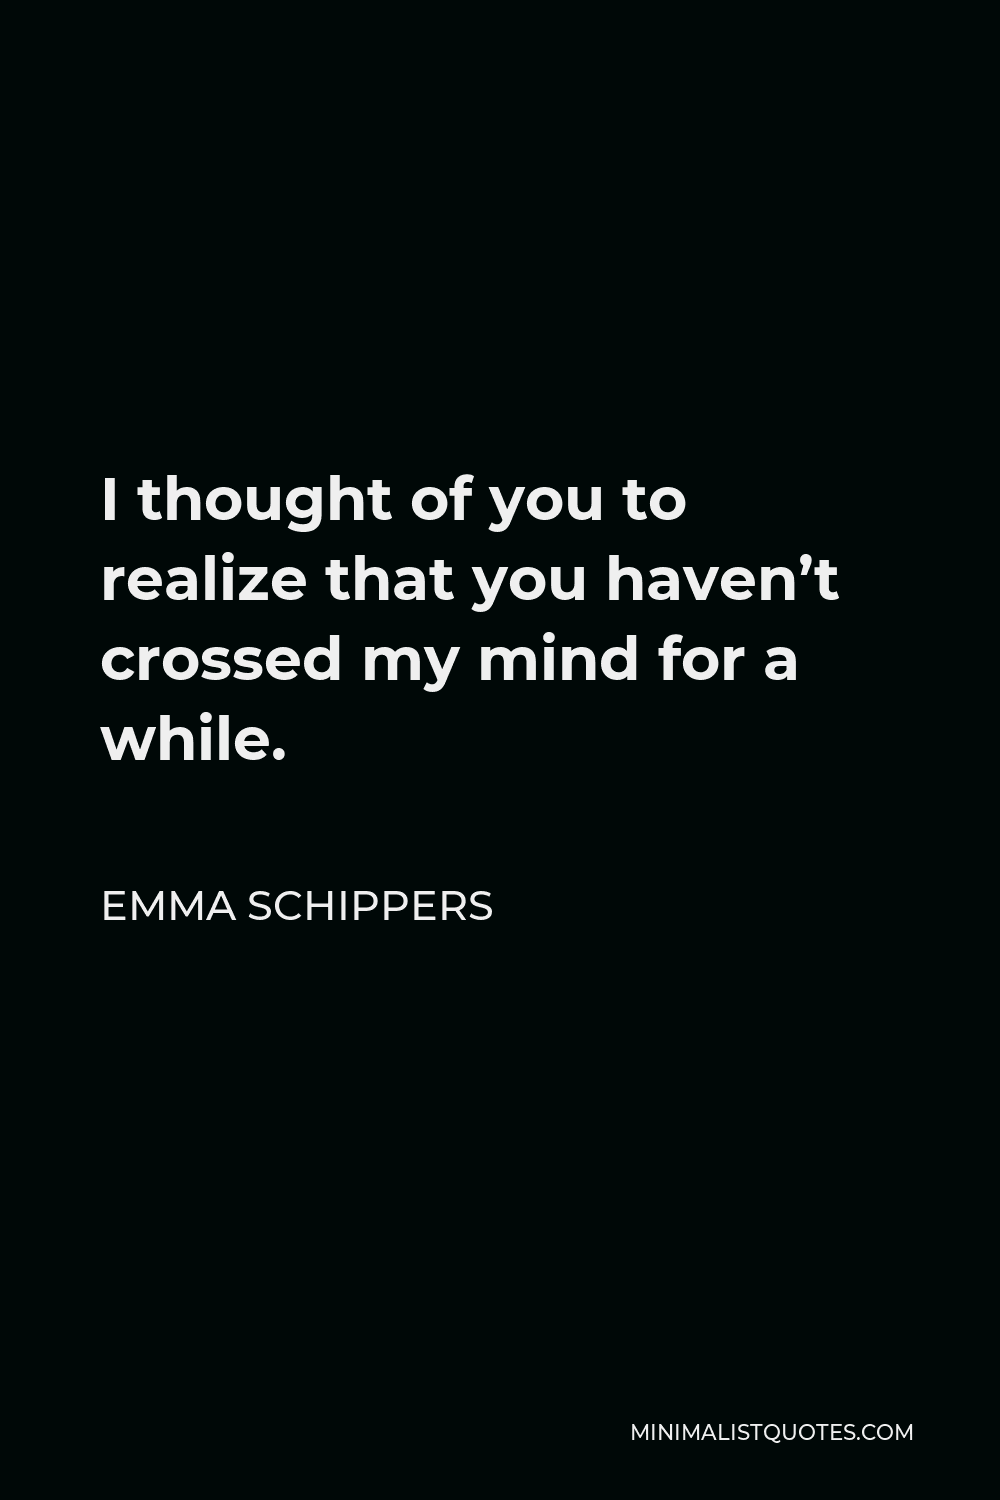 Emma Schippers Quote - I thought of you to realize that you haven’t crossed my mind for a while.